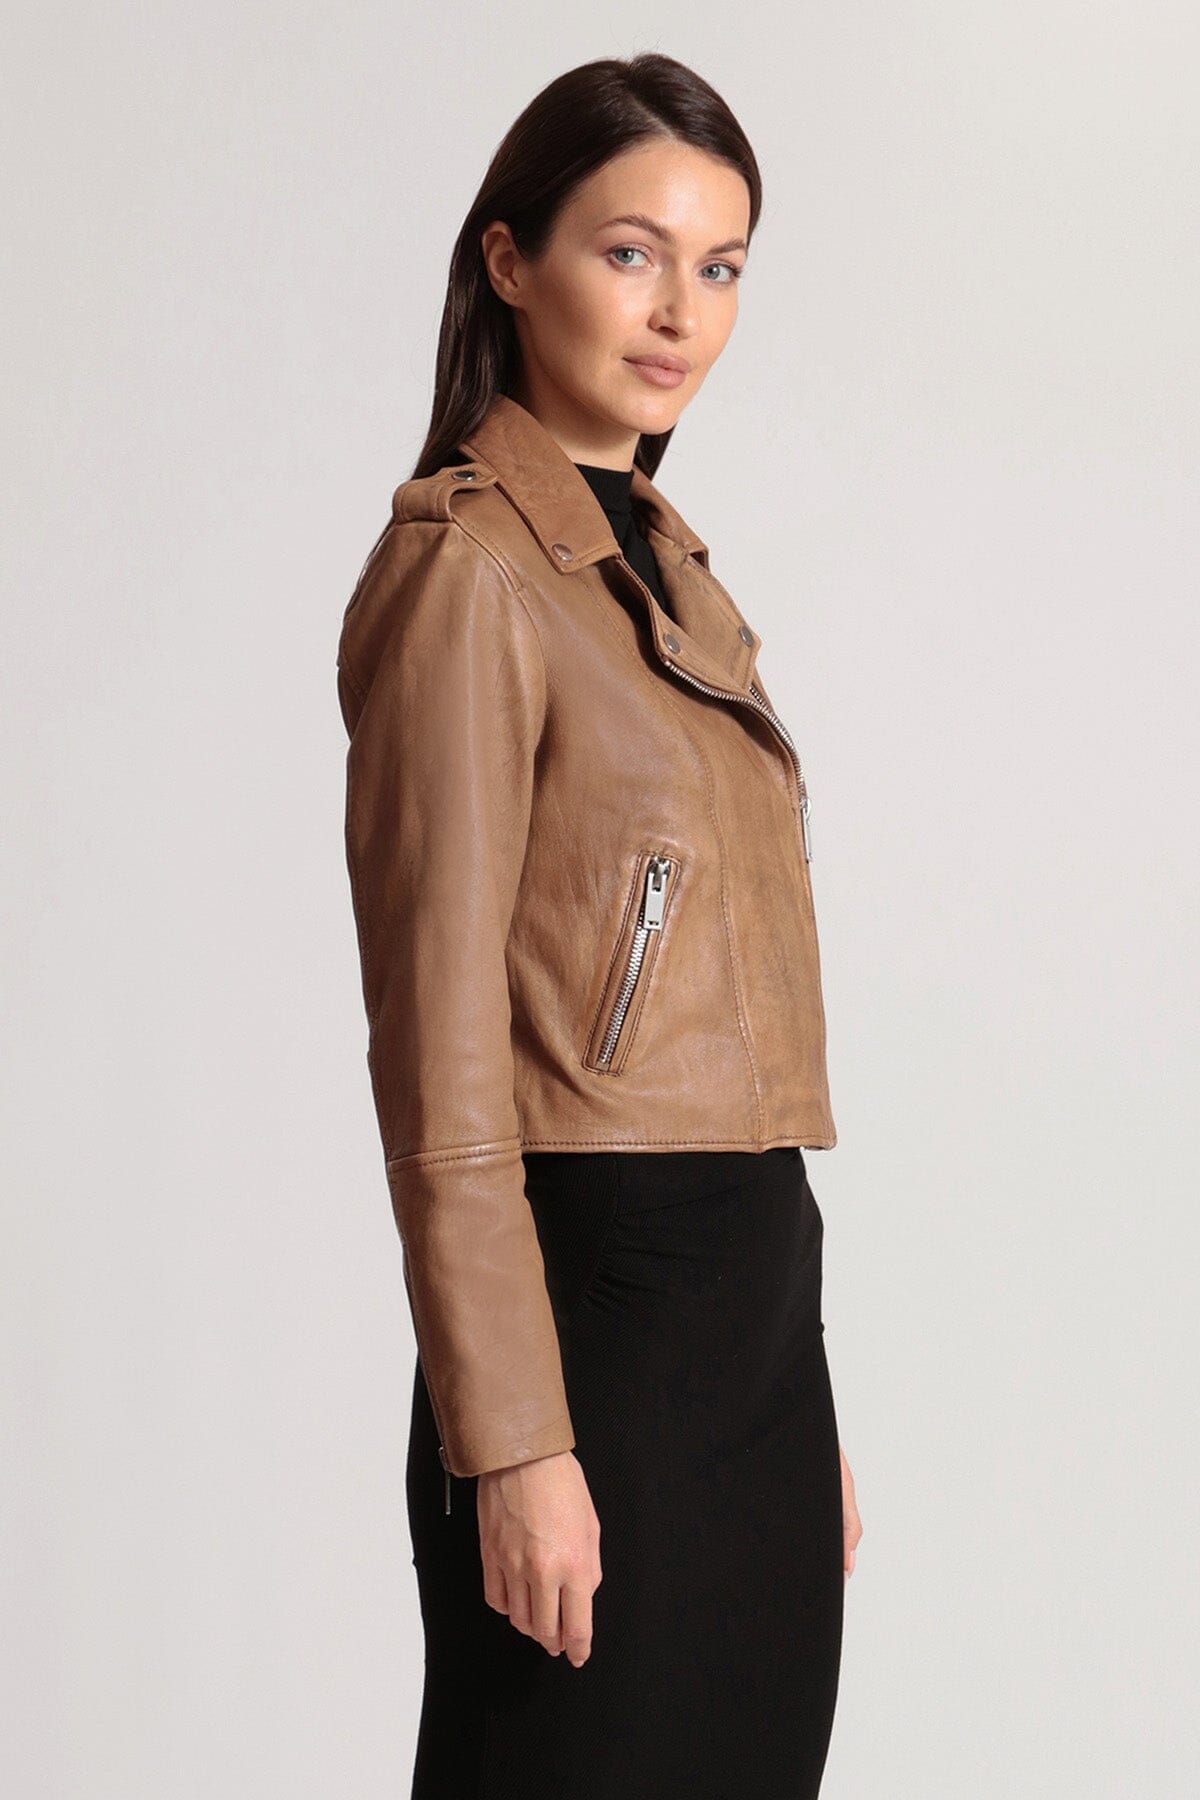 Brown genuine leather cropped biker jacket coat - figure flattering office to date night jackets coats for ladies